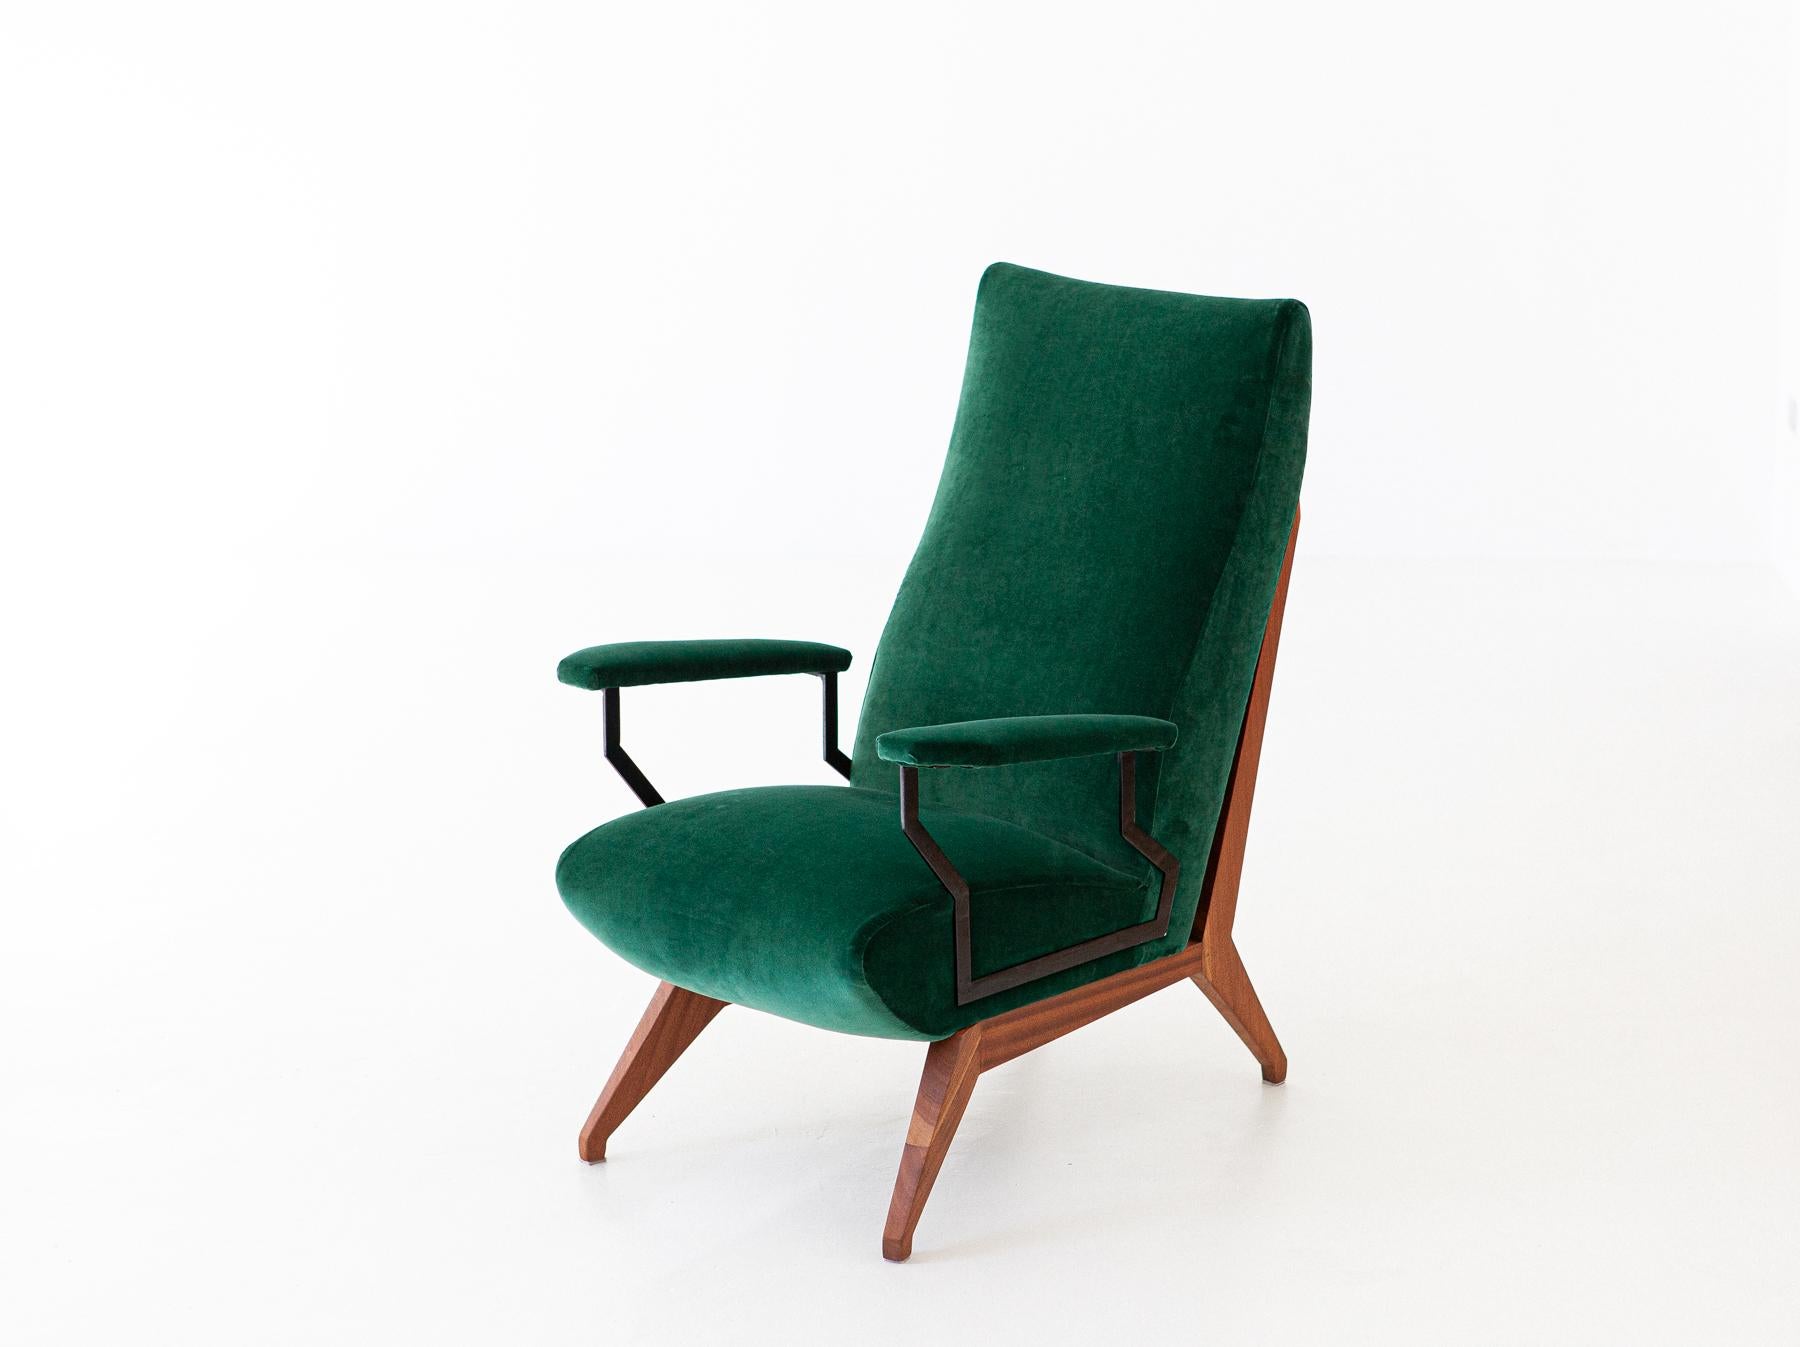 Mid-Century Modern Lounge chair with armrests manufactured in Italy in 1950s

Mahogany wood frame and new green cotton velvet upholstery , also the padding is new

Completely restored , new black enamel on the iron armrests , mahogany wooden frame